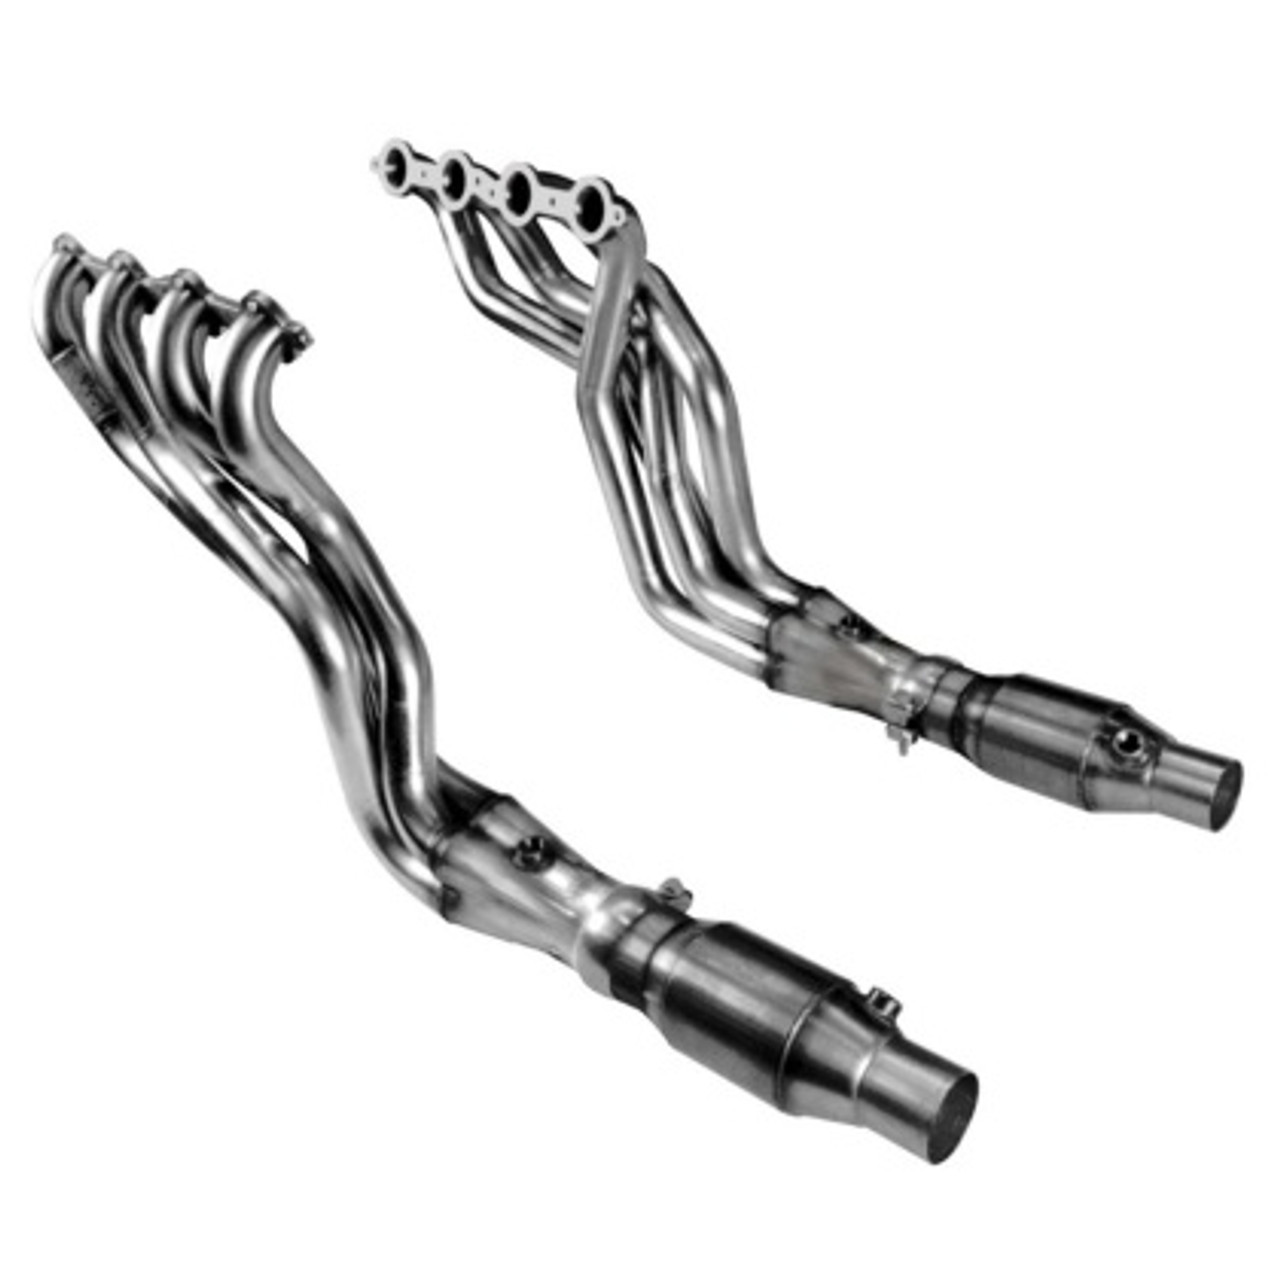 Kooks 1 7/8in x 3in SS LT Headers Catted  - 10-14 Chevy Camaro LS3/L99/LSA (2250H420)